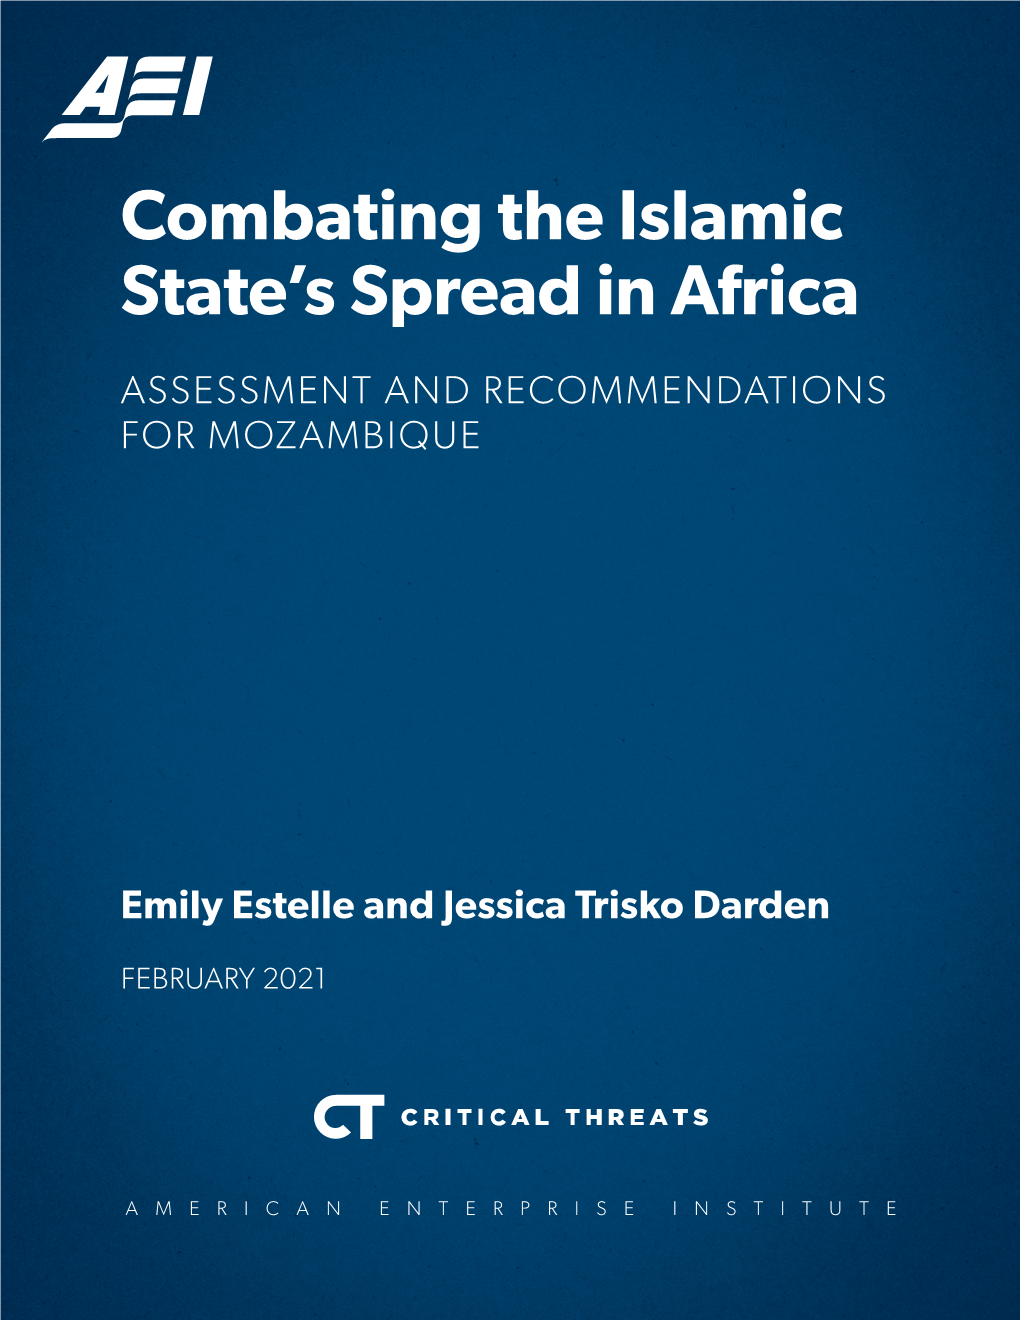 Combating the Islamic State's Spread in Africa